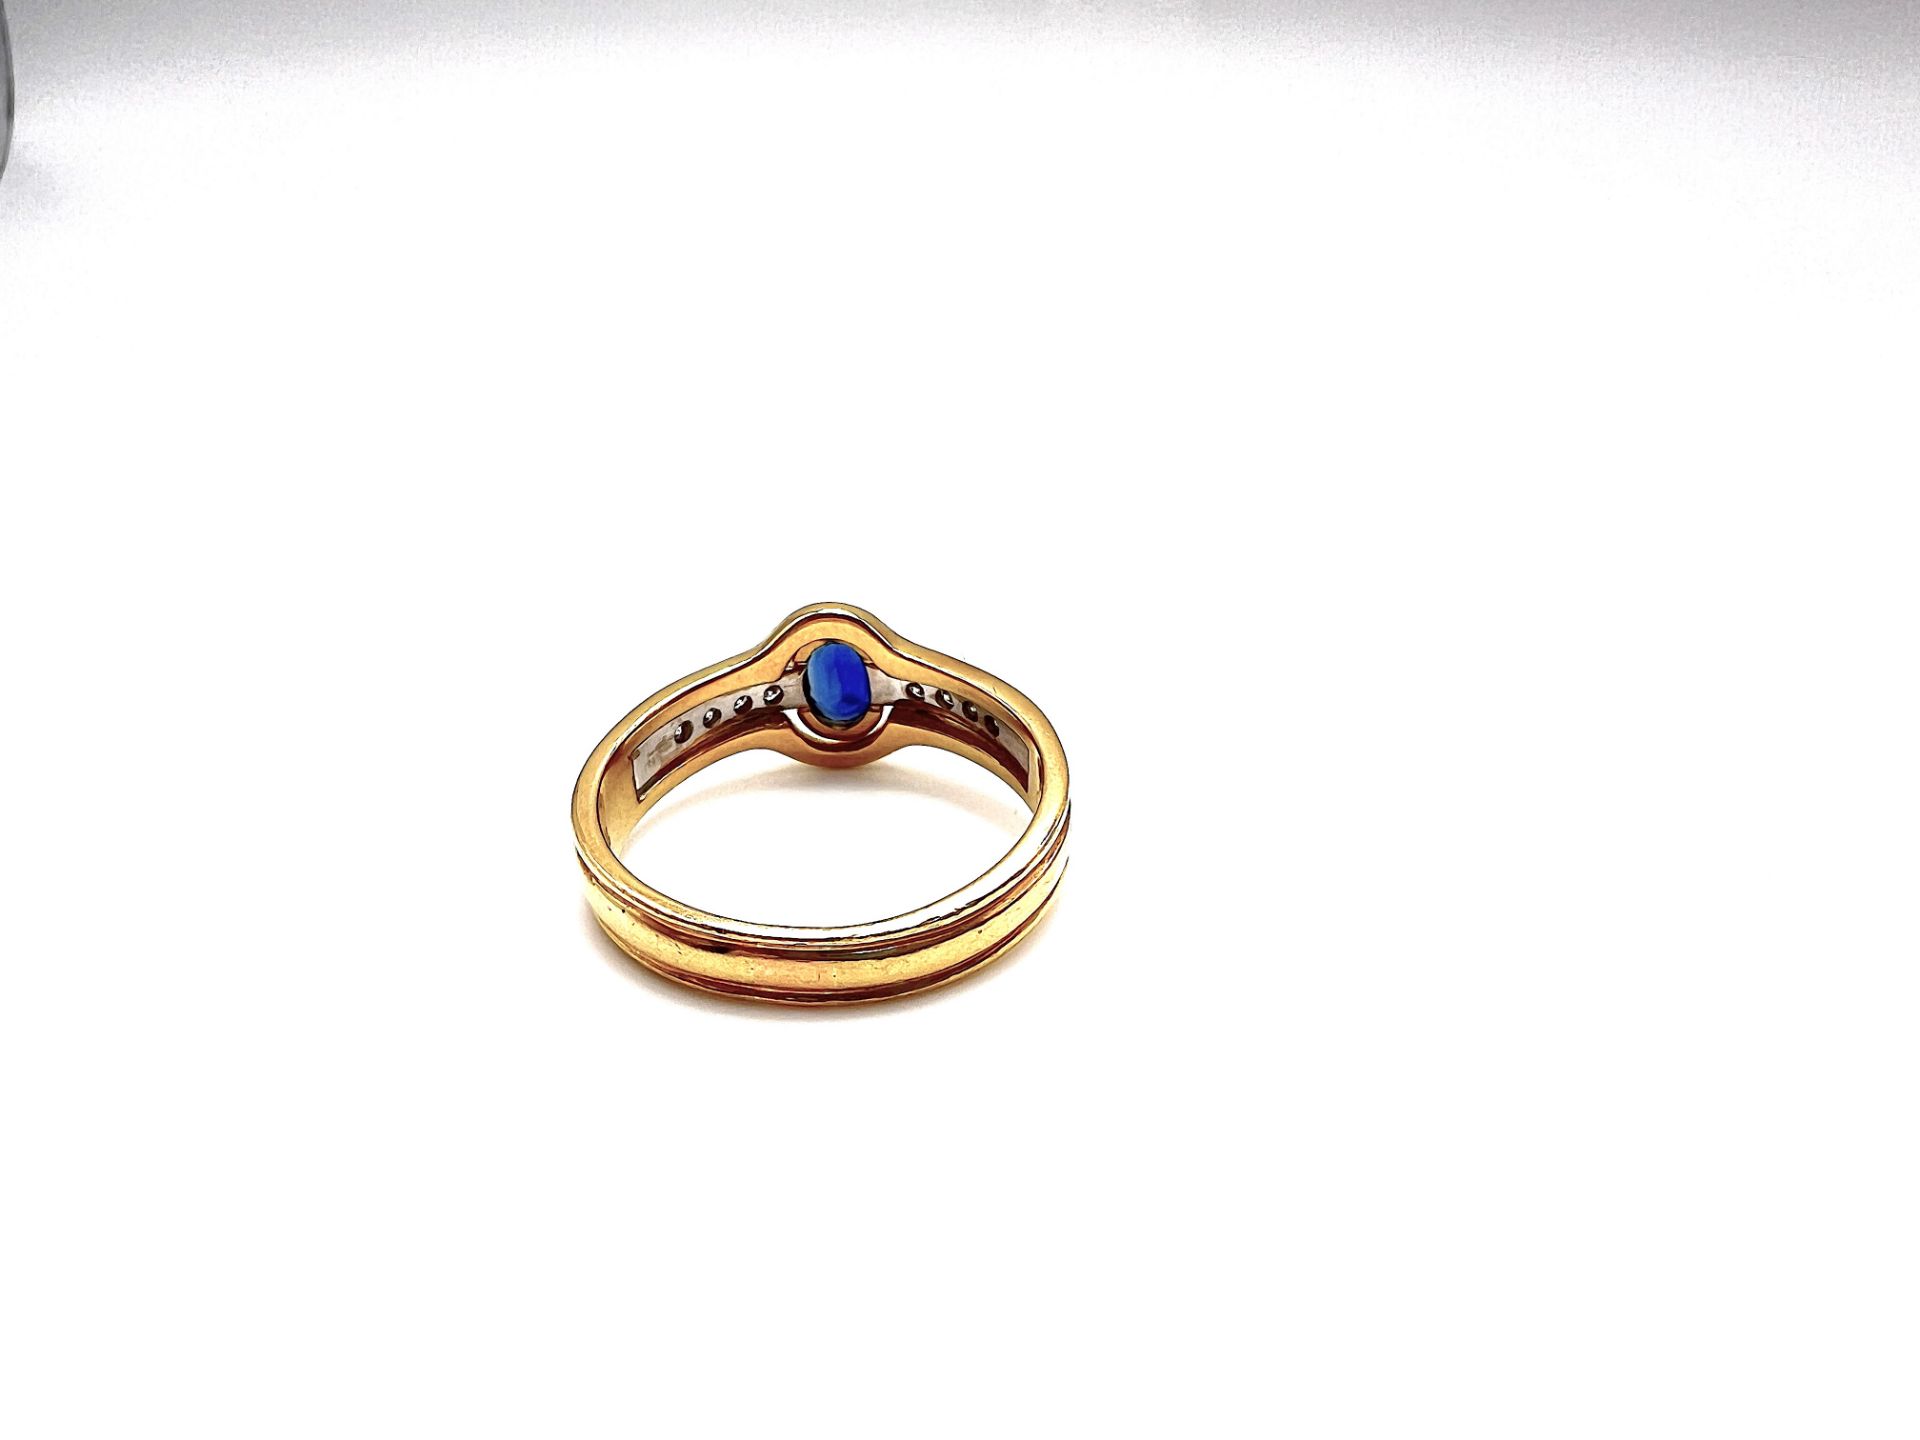 Sapphire ring with brillant-cut diamonds - Image 7 of 8